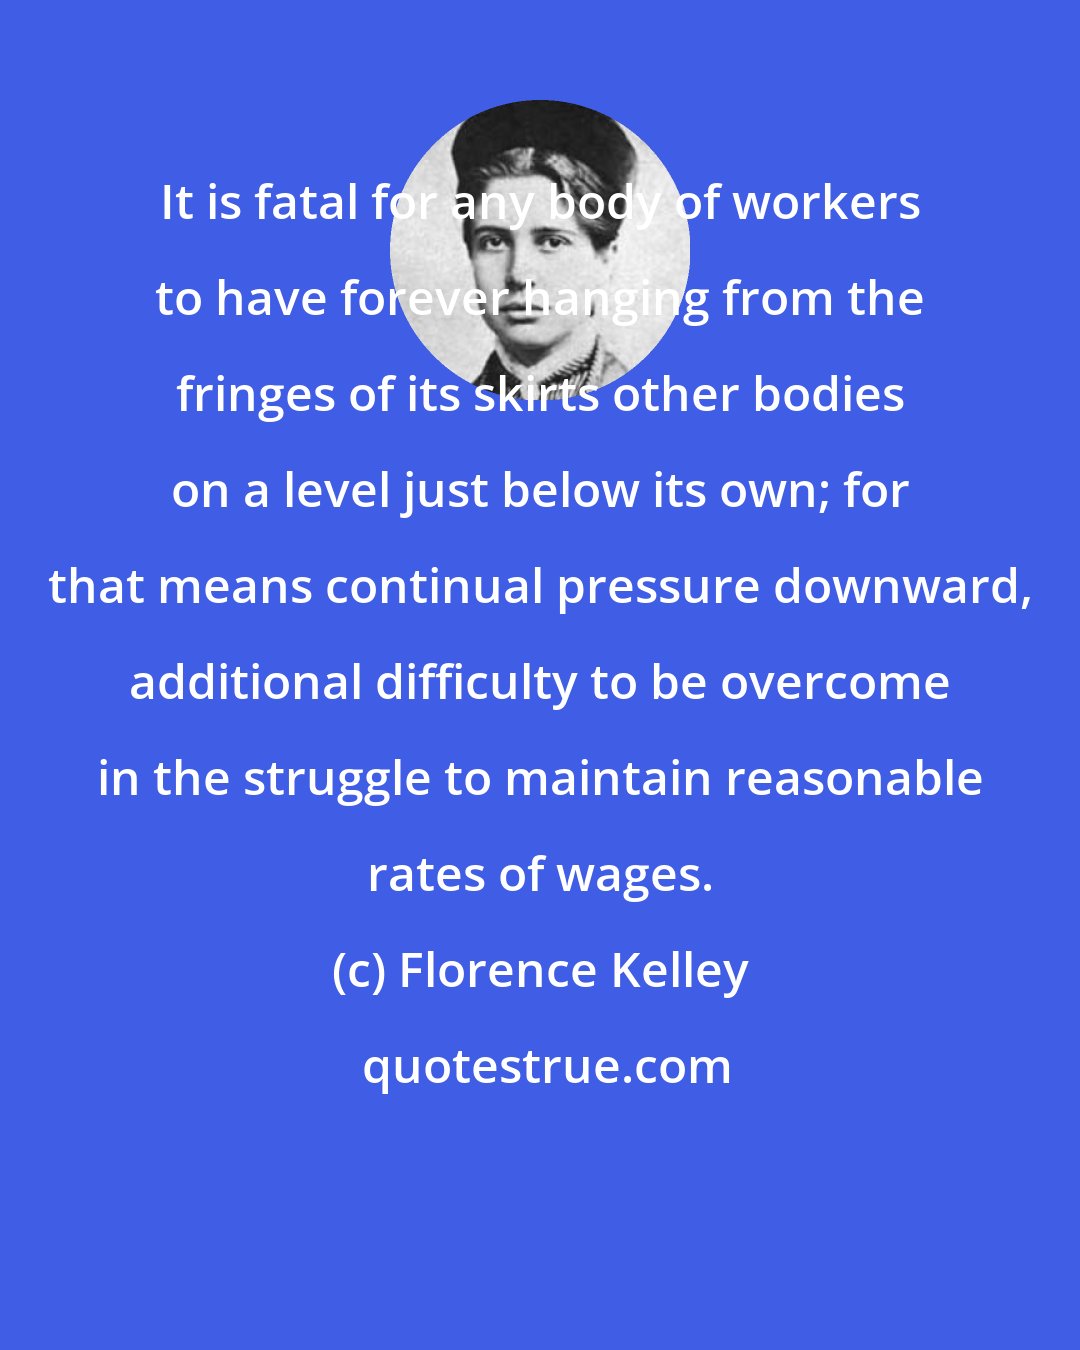 Florence Kelley: It is fatal for any body of workers to have forever hanging from the fringes of its skirts other bodies on a level just below its own; for that means continual pressure downward, additional difficulty to be overcome in the struggle to maintain reasonable rates of wages.